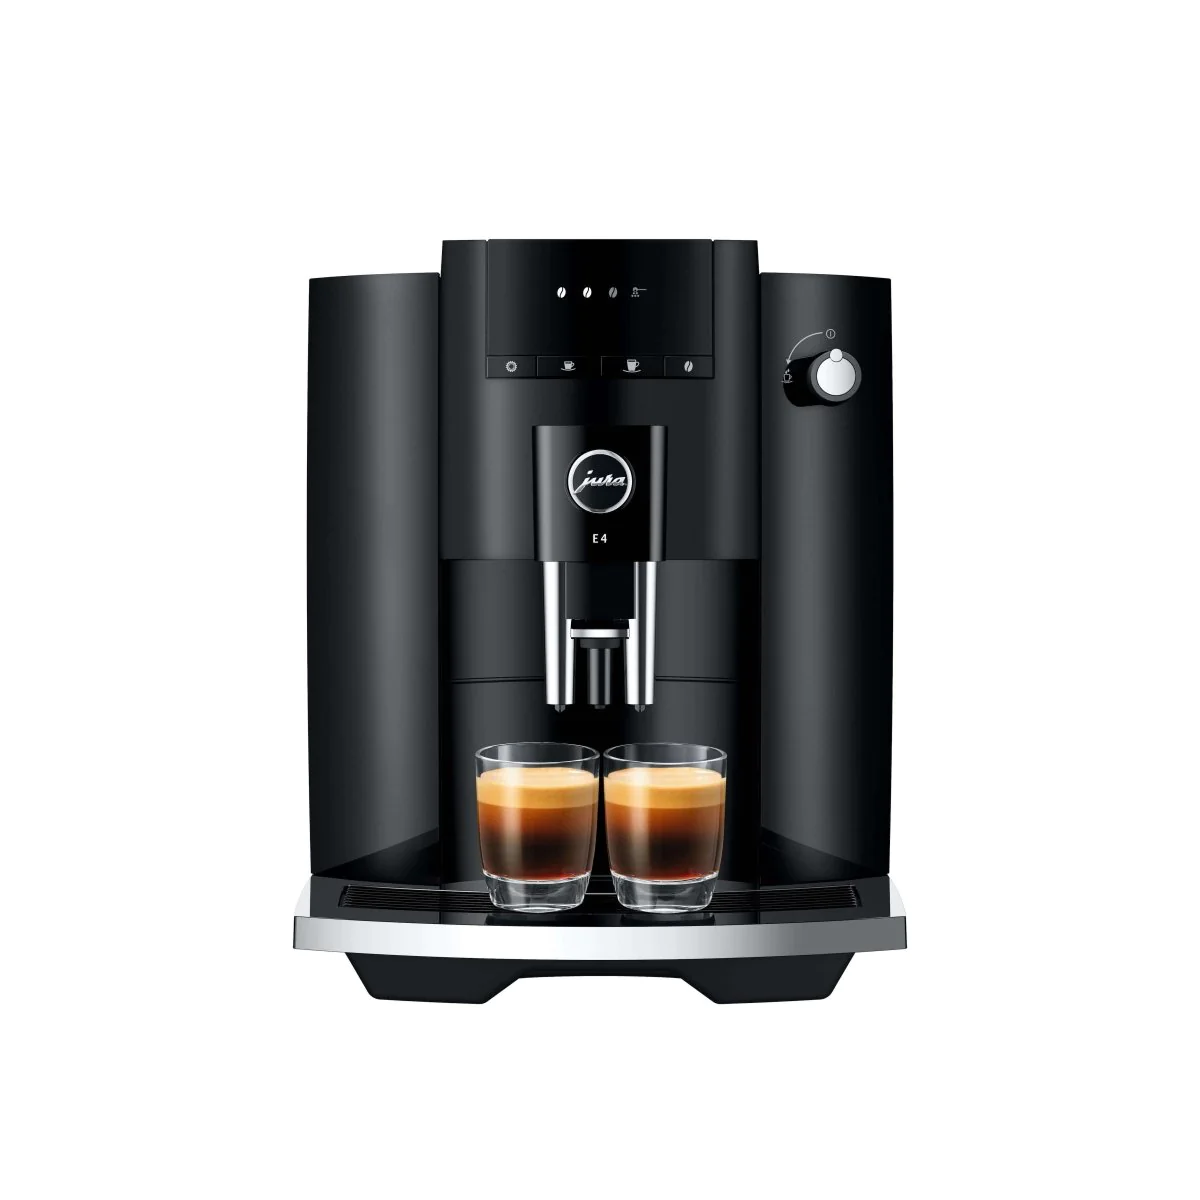 How do I prevent my coffee machine from becoming clogged?